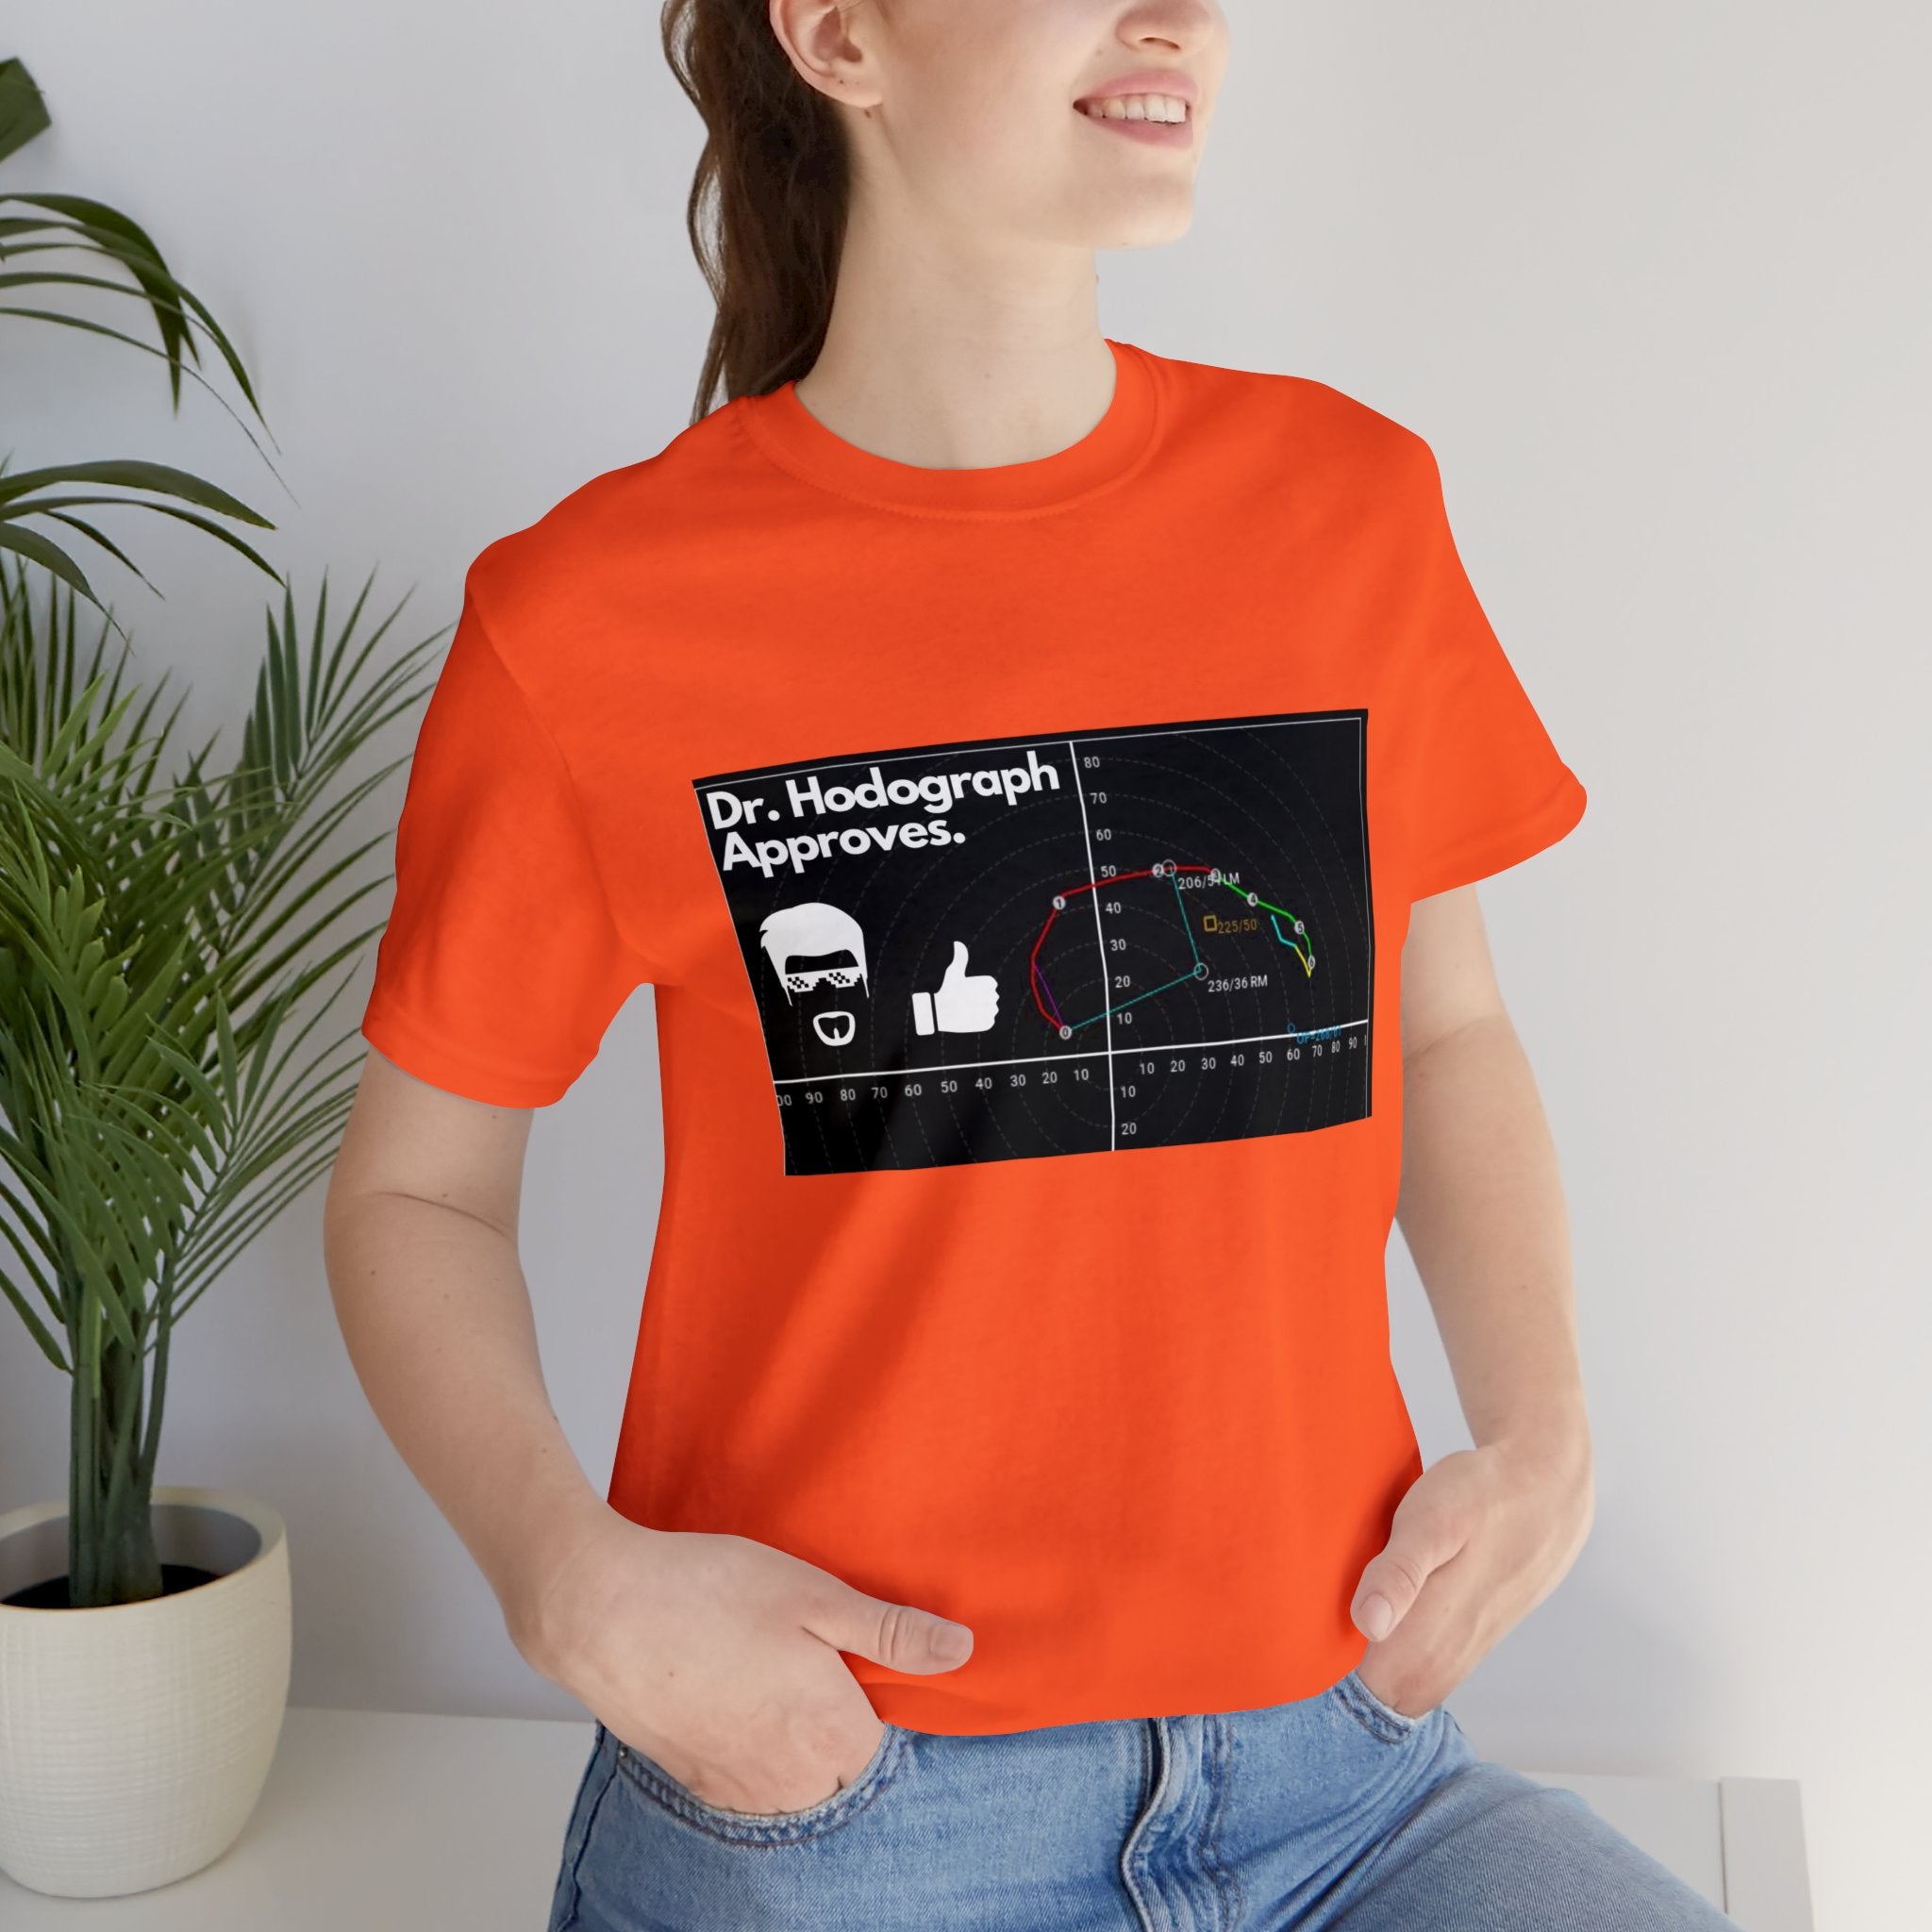 Dr Hodograph Approves Tee 